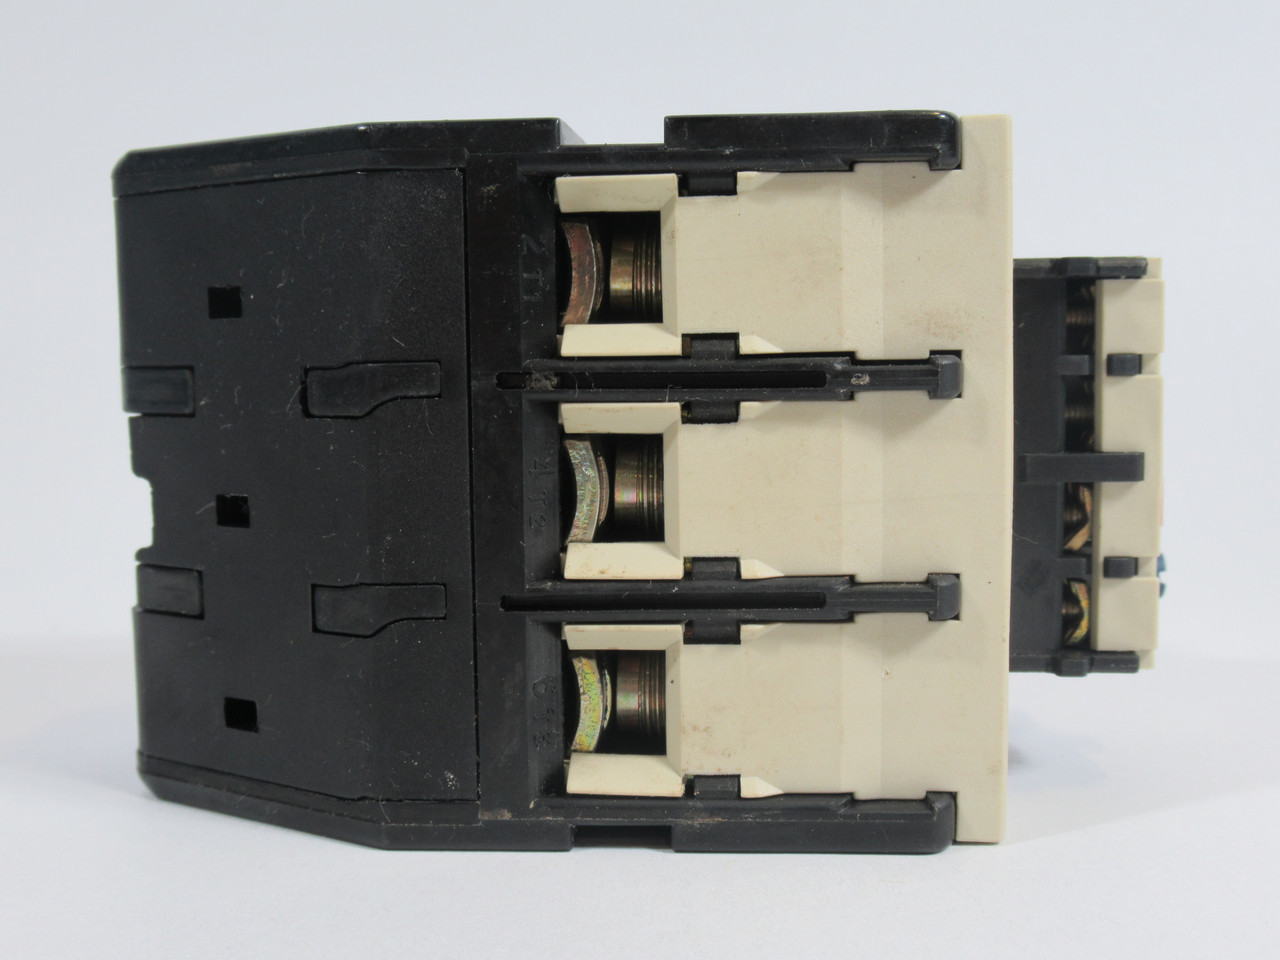 Telemecanique LR2-D3353 Thermal Overload Relay 5A/23-32A USED